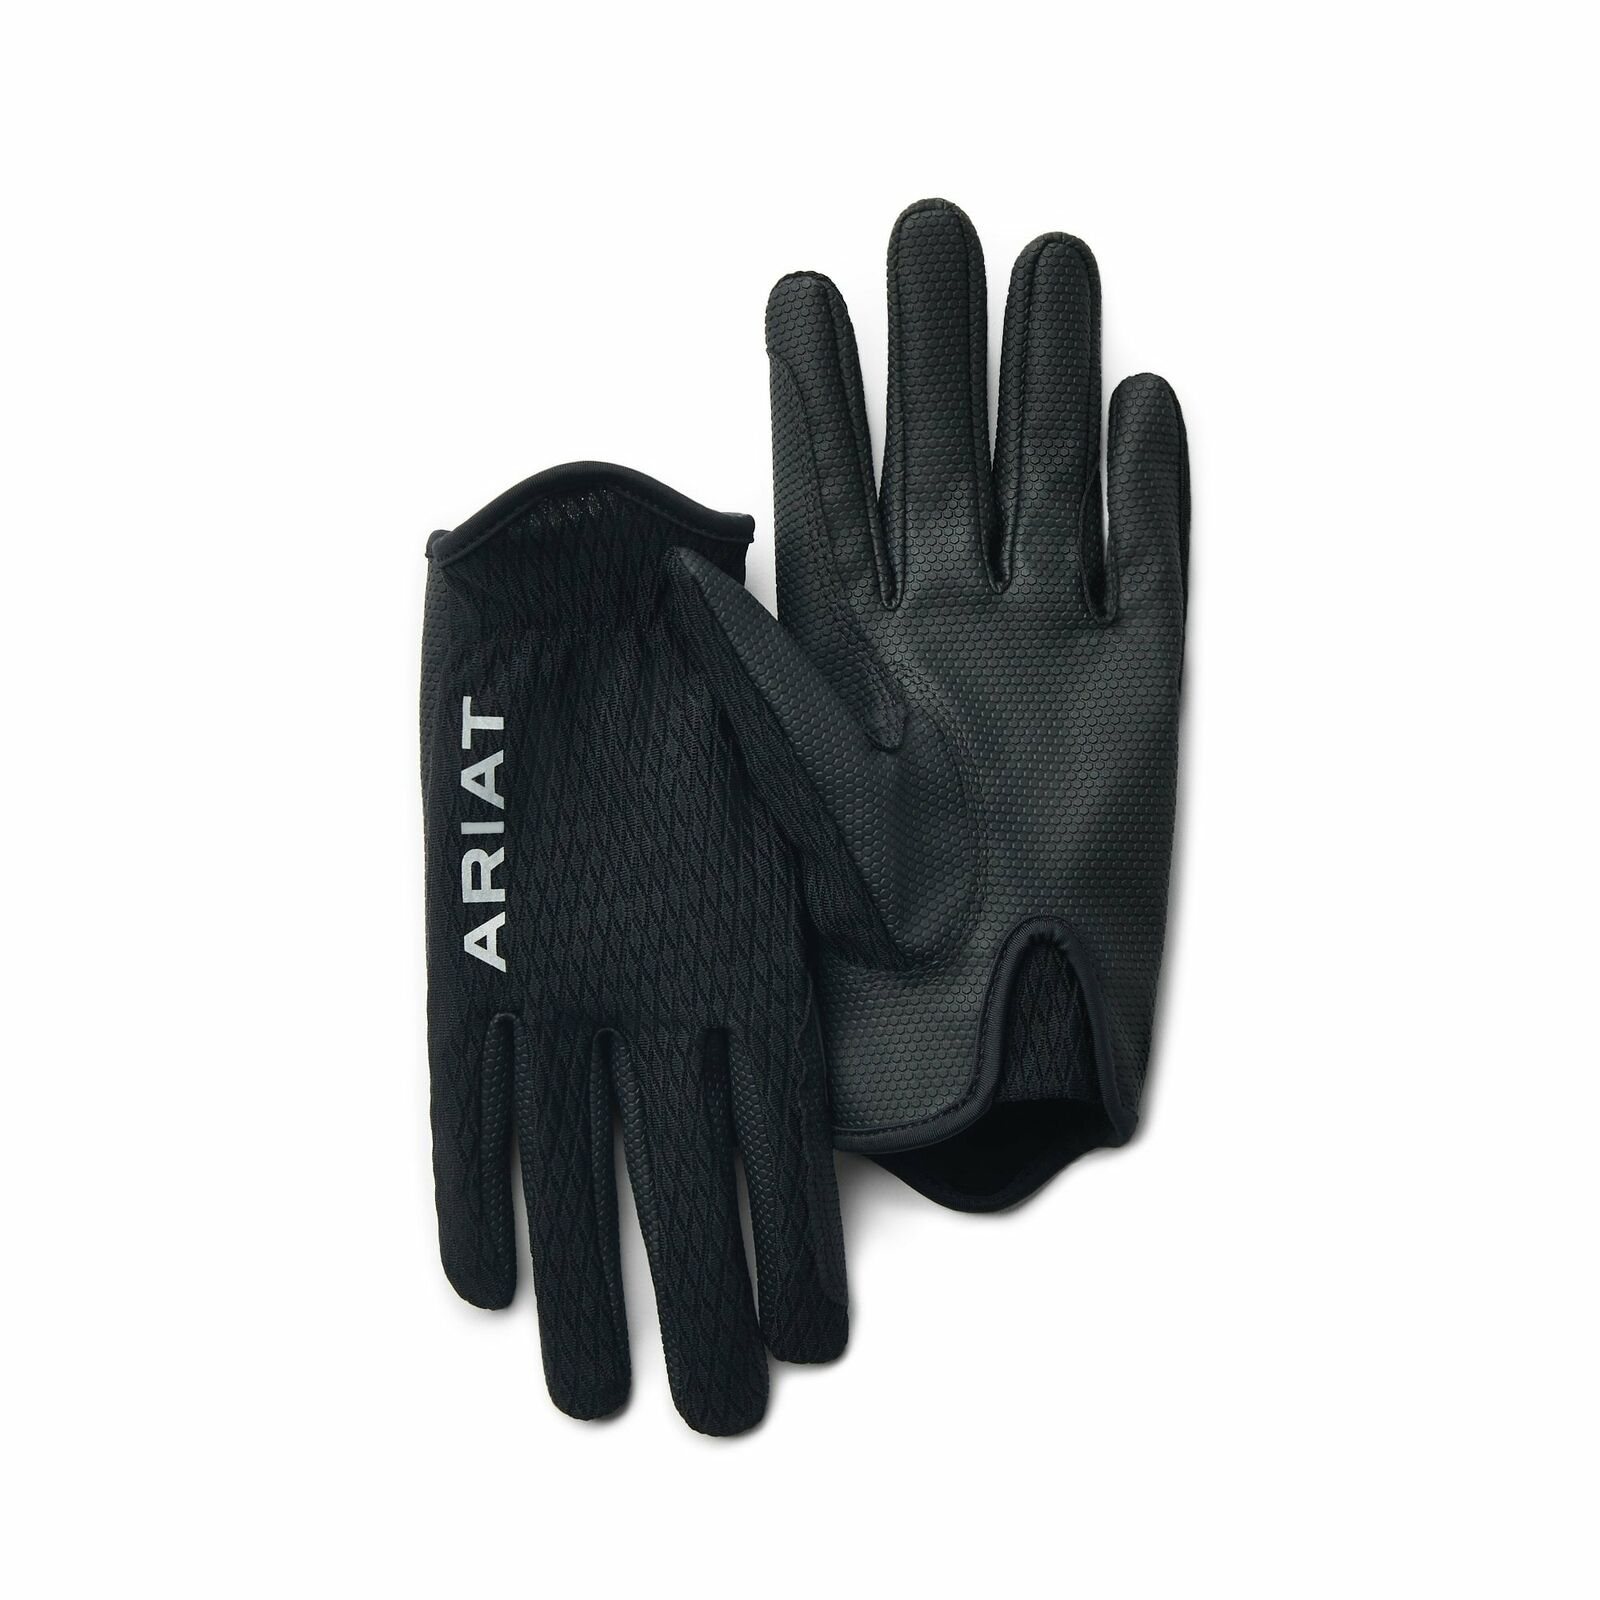 *STOCK CLEARANCE* Ariat Insulated Tek Grip Gloves Black 11